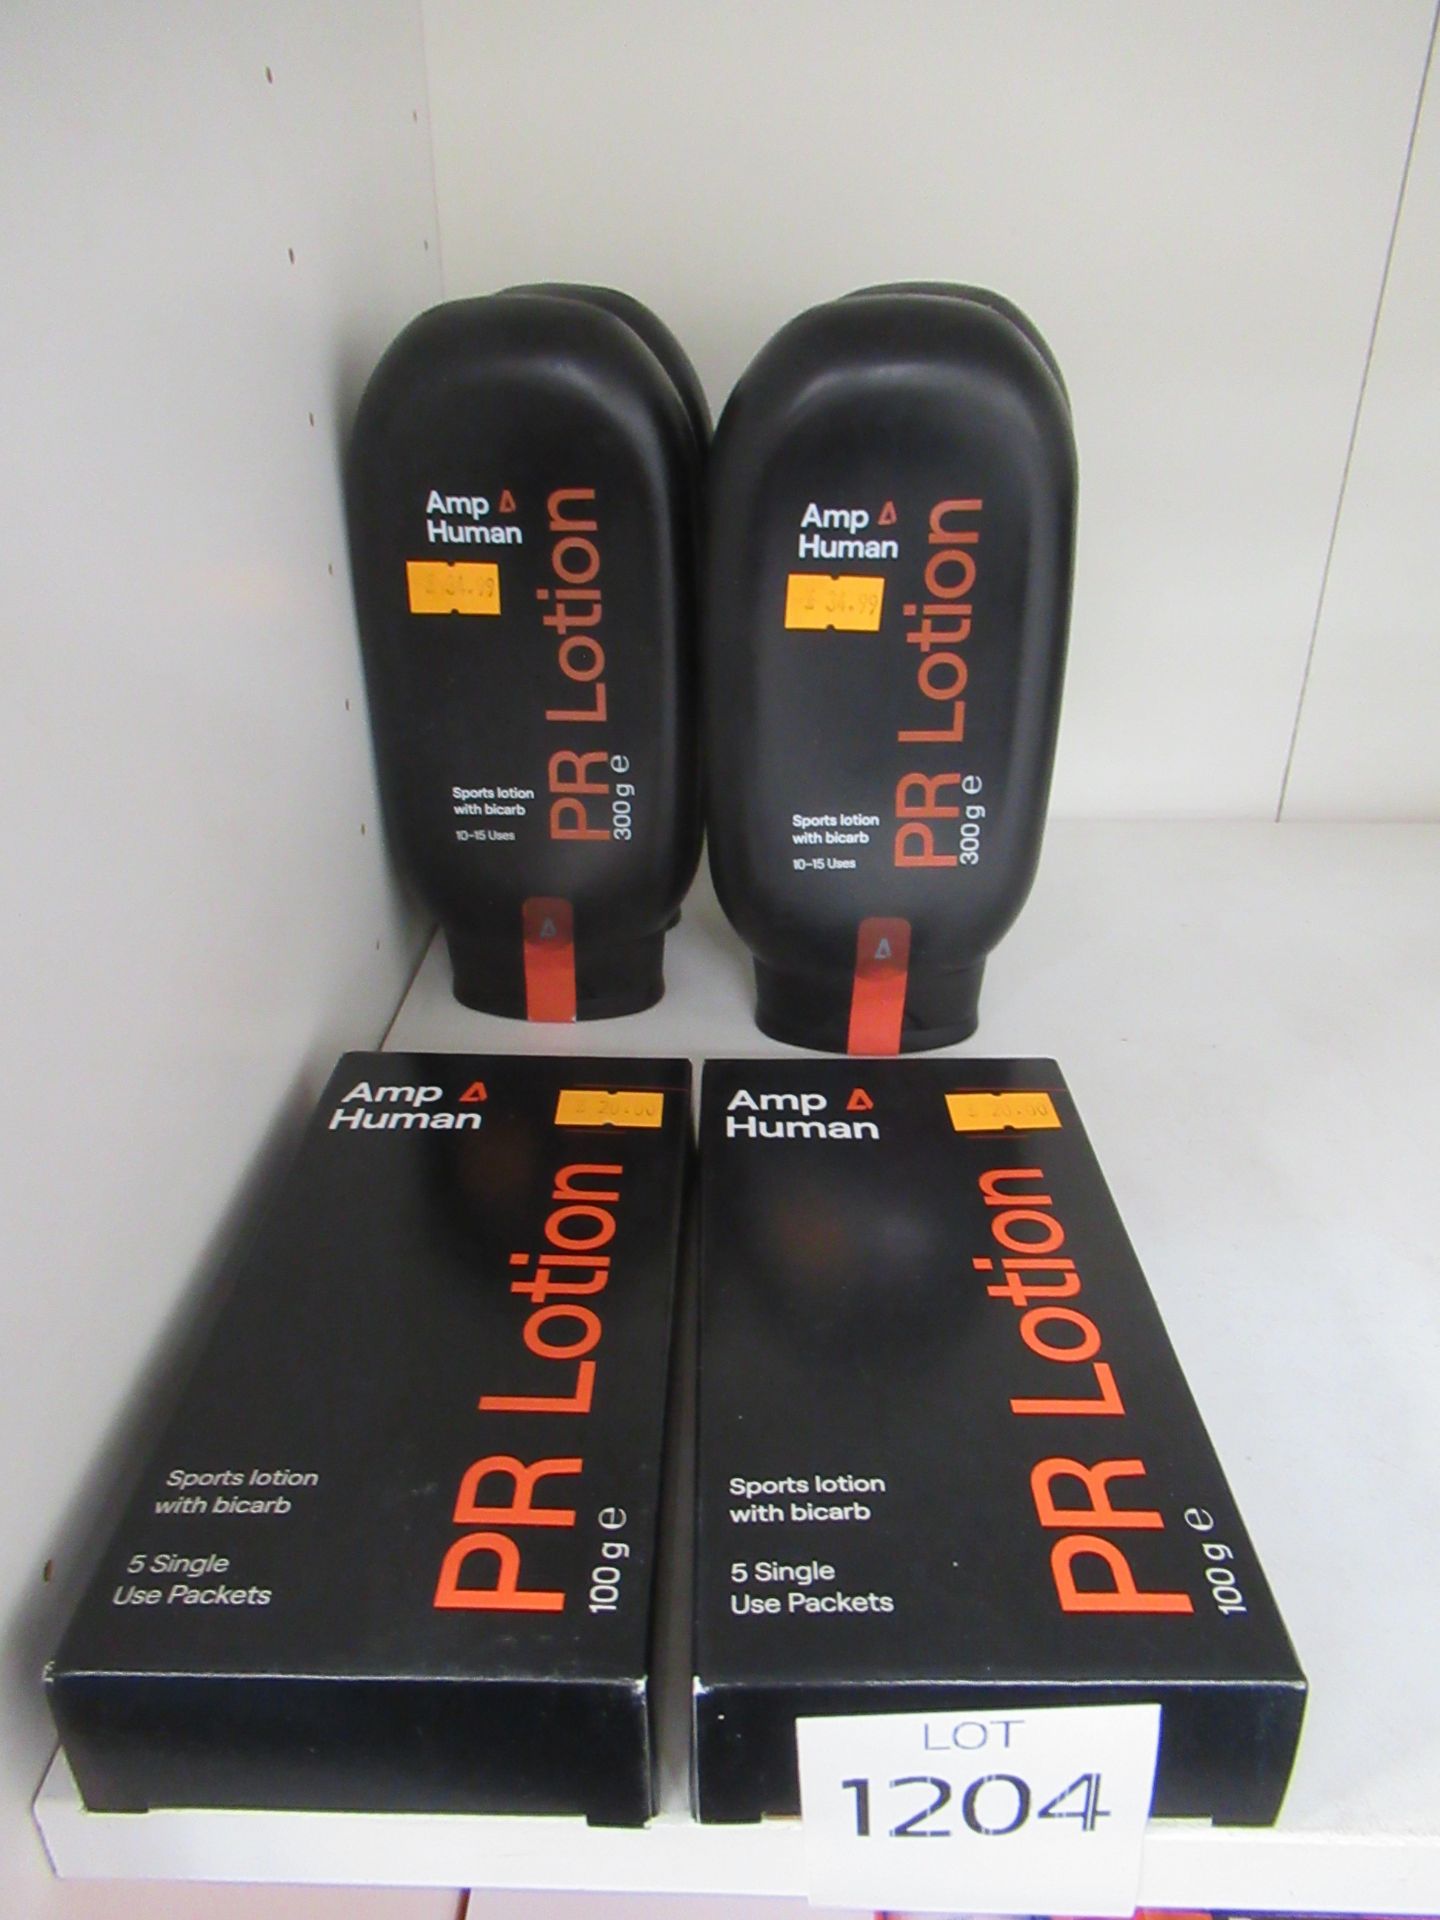 Amp Human PR Lotion - 4 x 300g bottled (RRP£34.99 each) and 10 x 20g packets (in two boxes - RRP£20